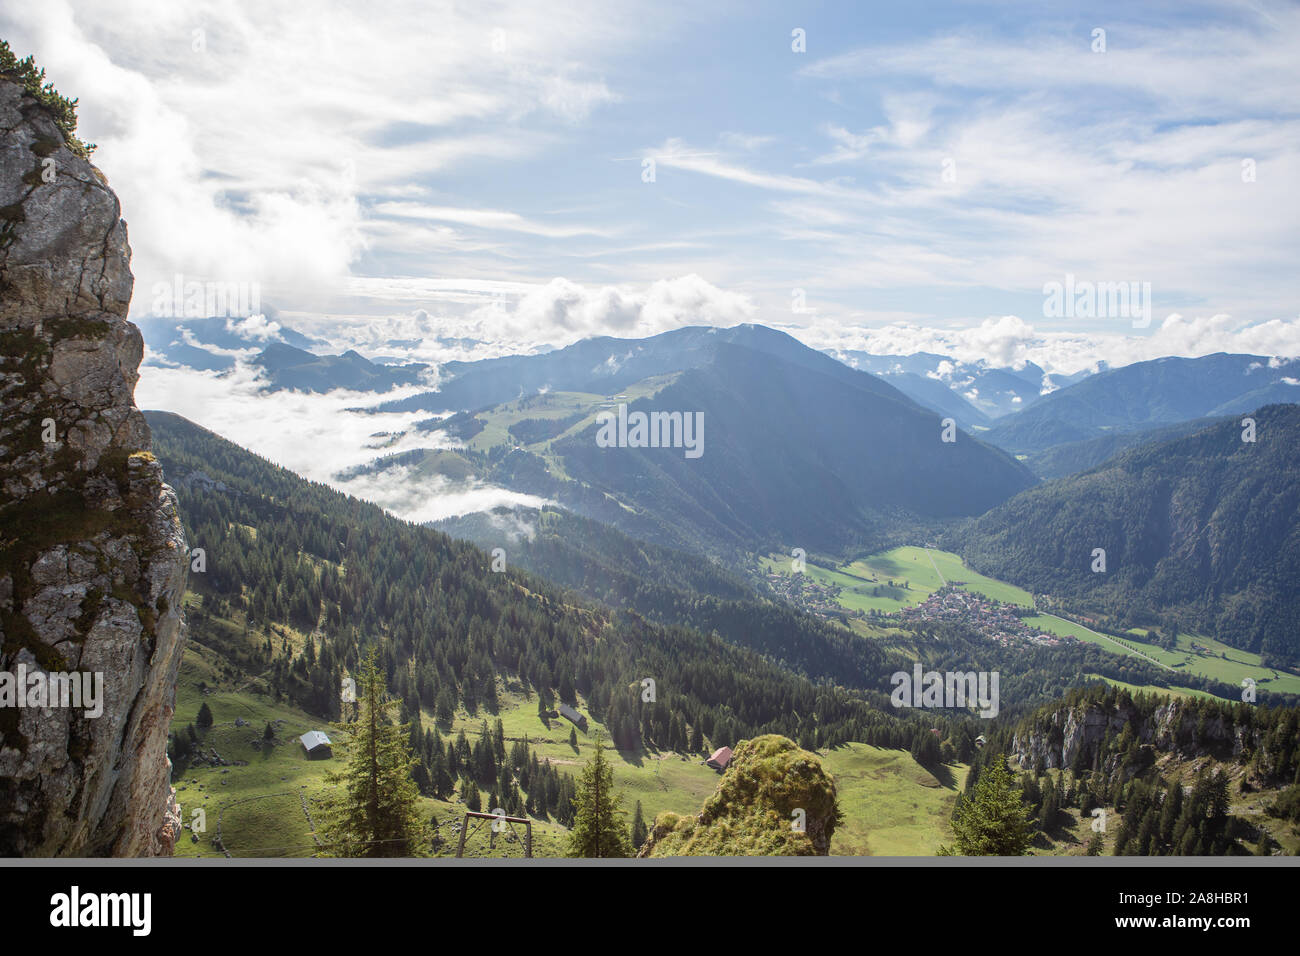 View from Wendelstein mountain. Bayrischzell. Bavaria, Germany. Alps Stock Photo